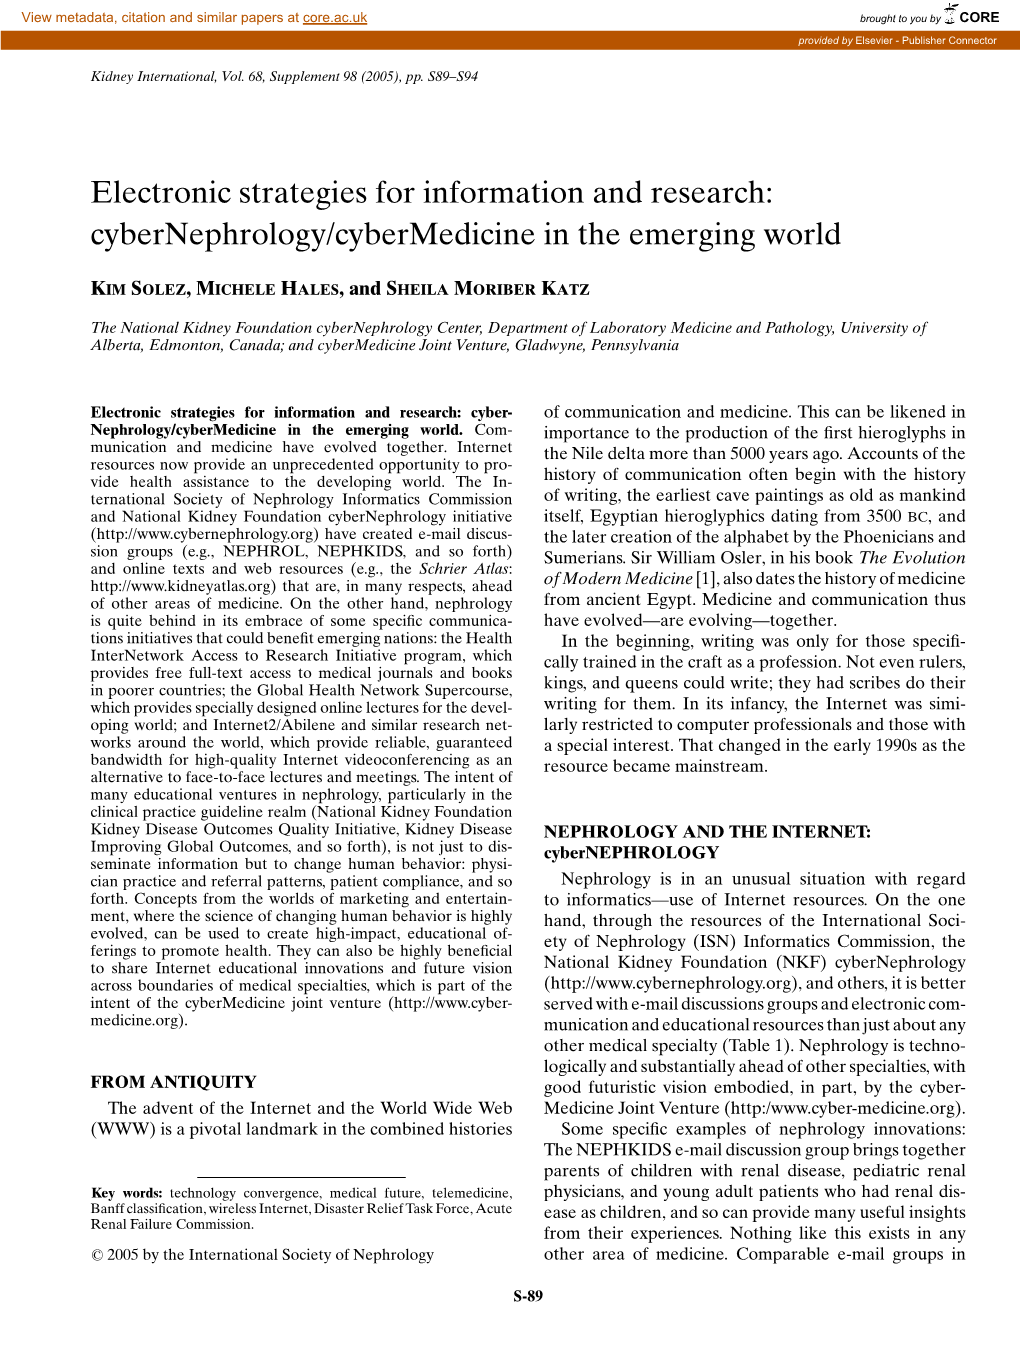 Electronic Strategies for Information and Research: Cybernephrology/Cybermedicine in the Emerging World